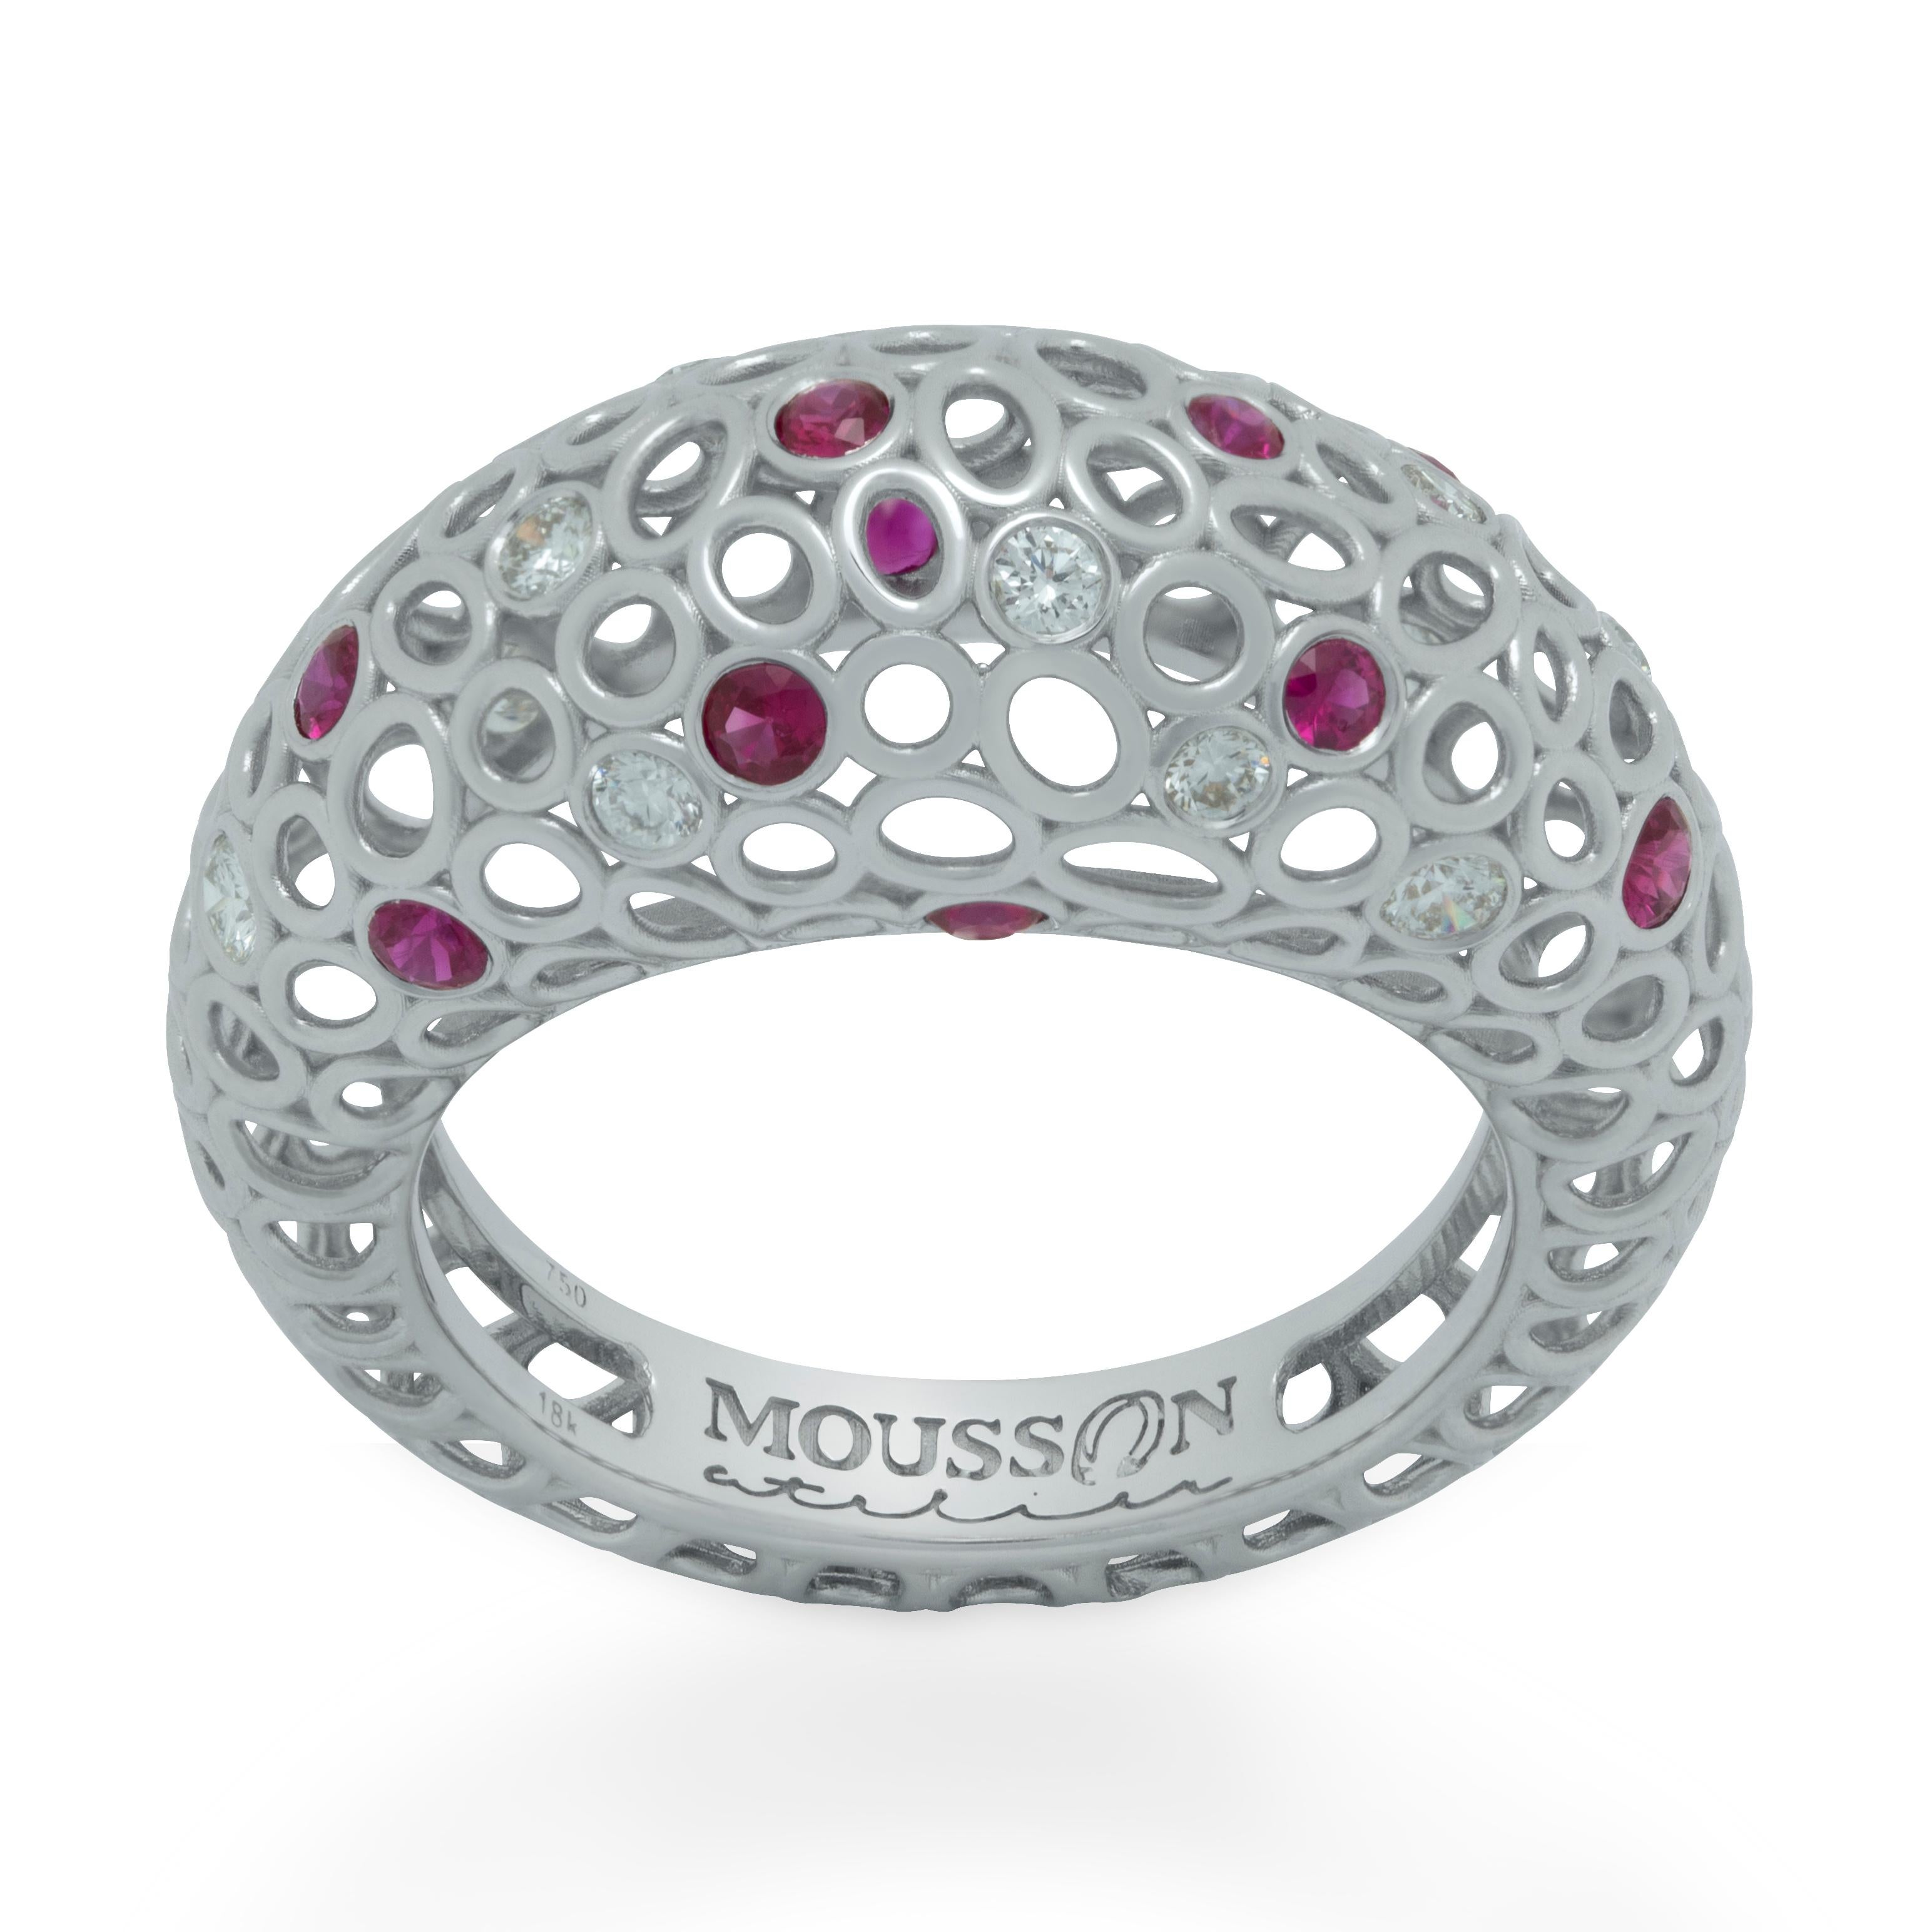 Diamonds Rubies 18 Karat White Gold Bubble Ring
Incredibly light and airy Ring from our Bubbles Collection. White 18 Karat Gold is made in the form of variety of small bubbles, some of which have 11 Rubies and 13 Diamonds setted. Instant beauty!
In